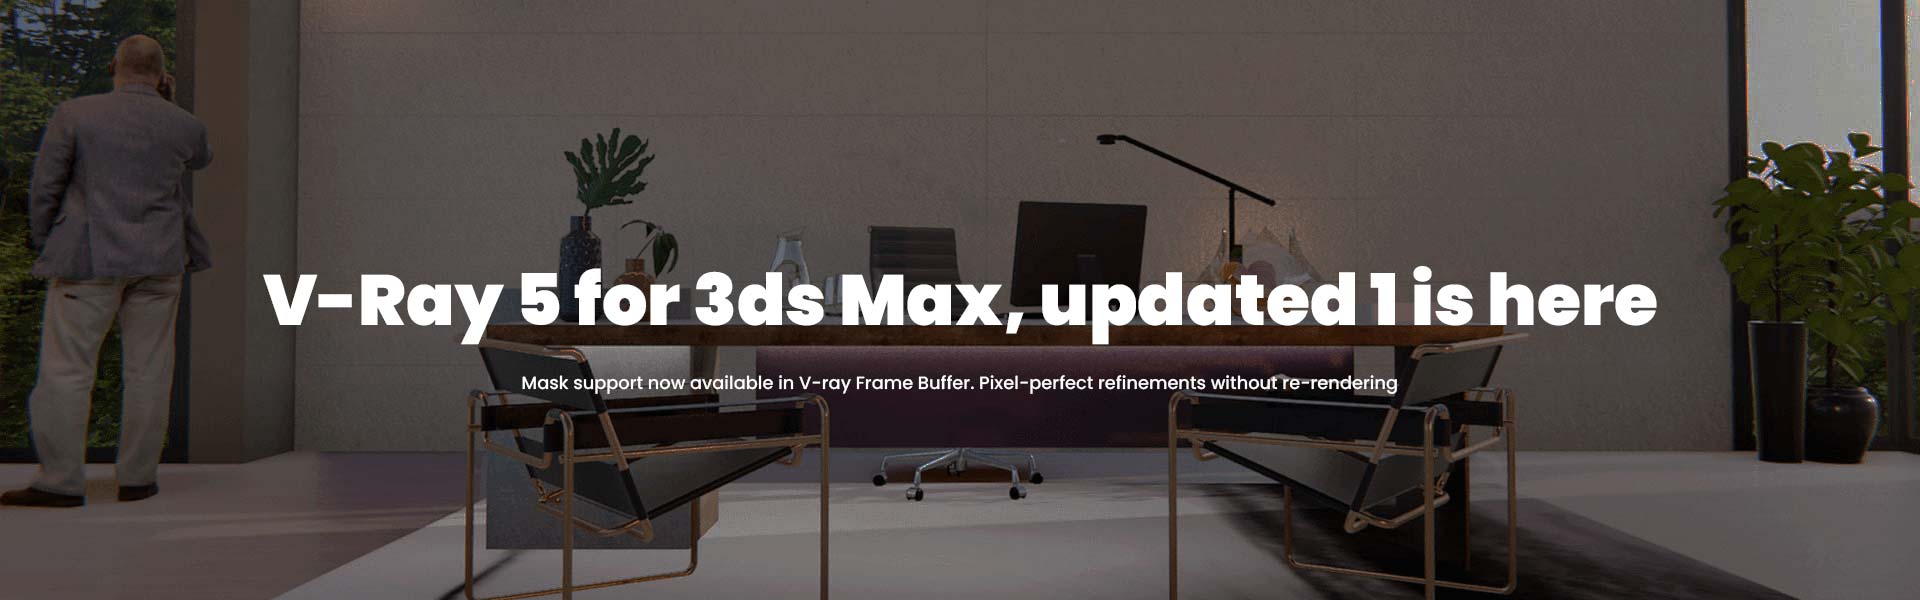 VRay 5 for 3ds Max